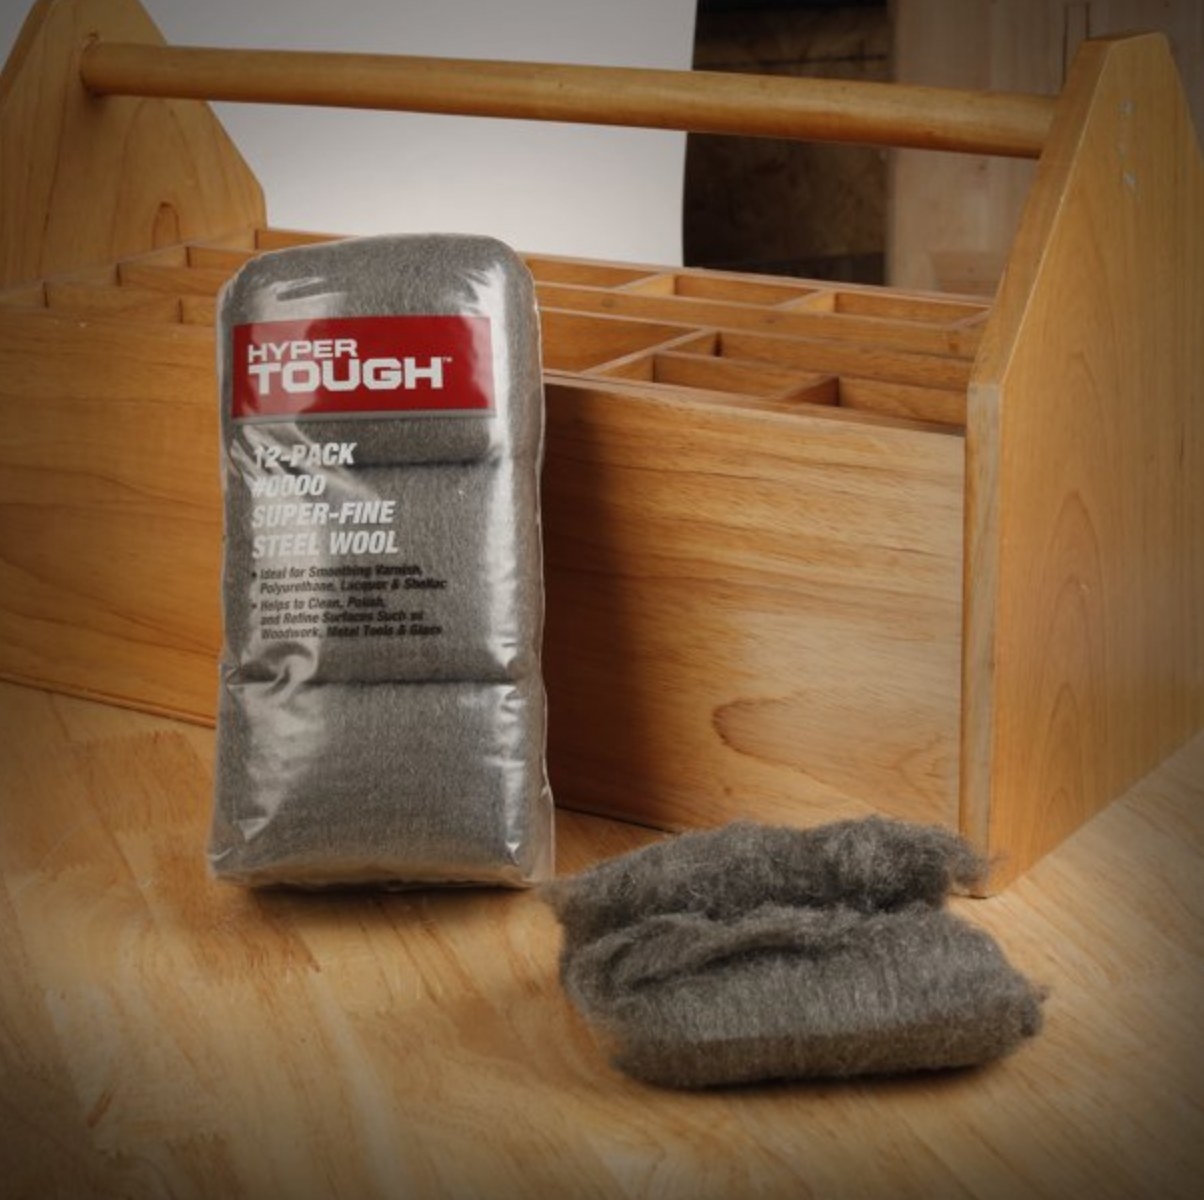 the silver steel wool in clear packaging in front of a wooden toolbox